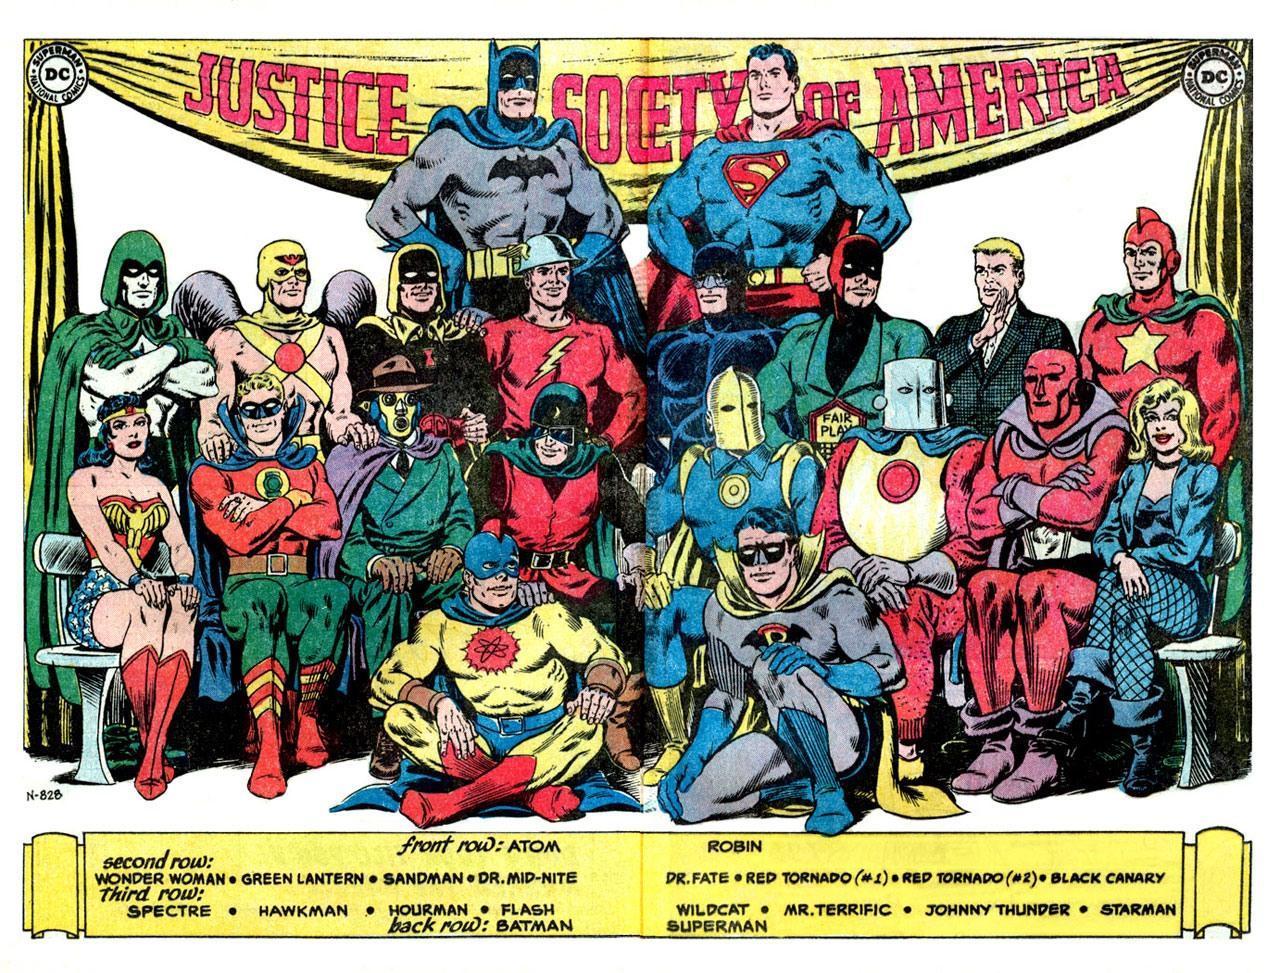 Justice Society Of America wallpapers, Comics, HQ Justice Society Of